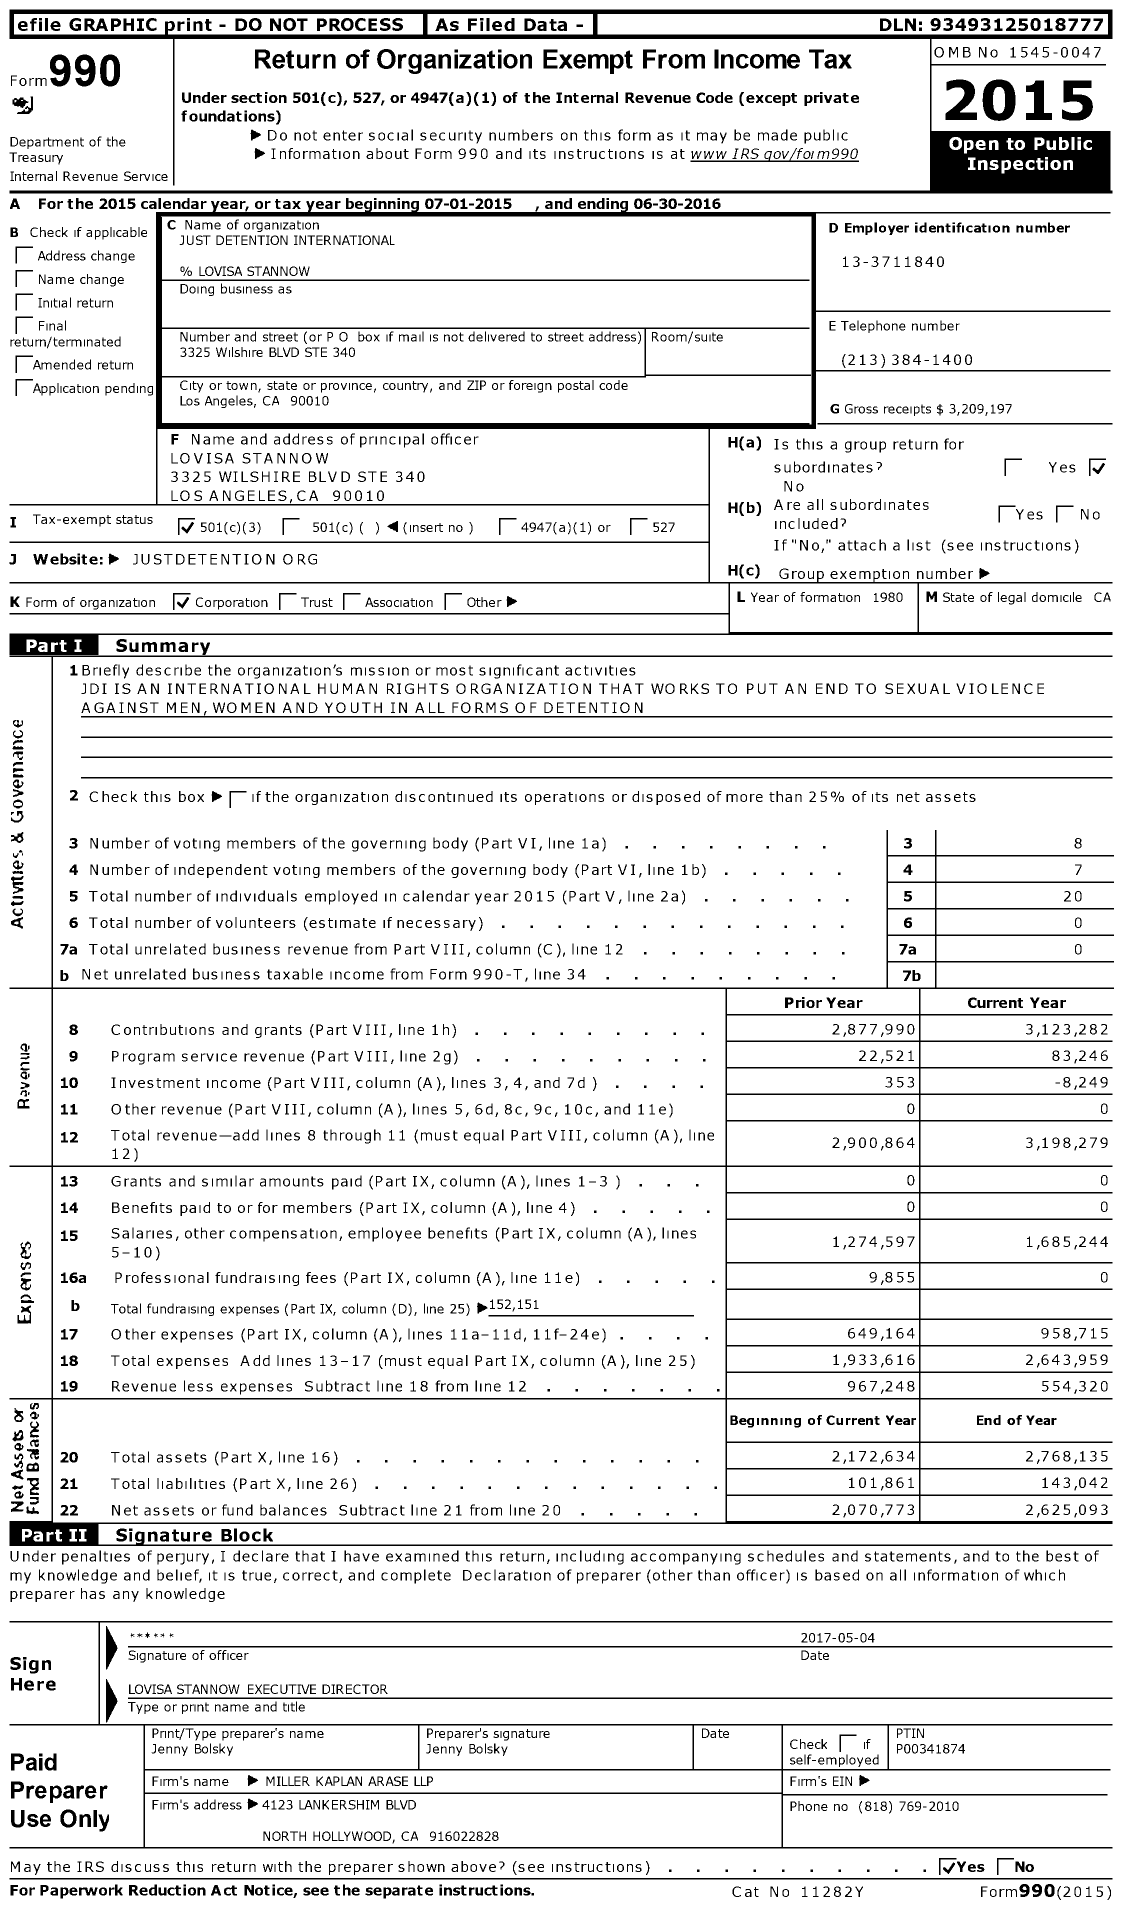 Image of first page of 2015 Form 990 for Just Detention International (JDI)